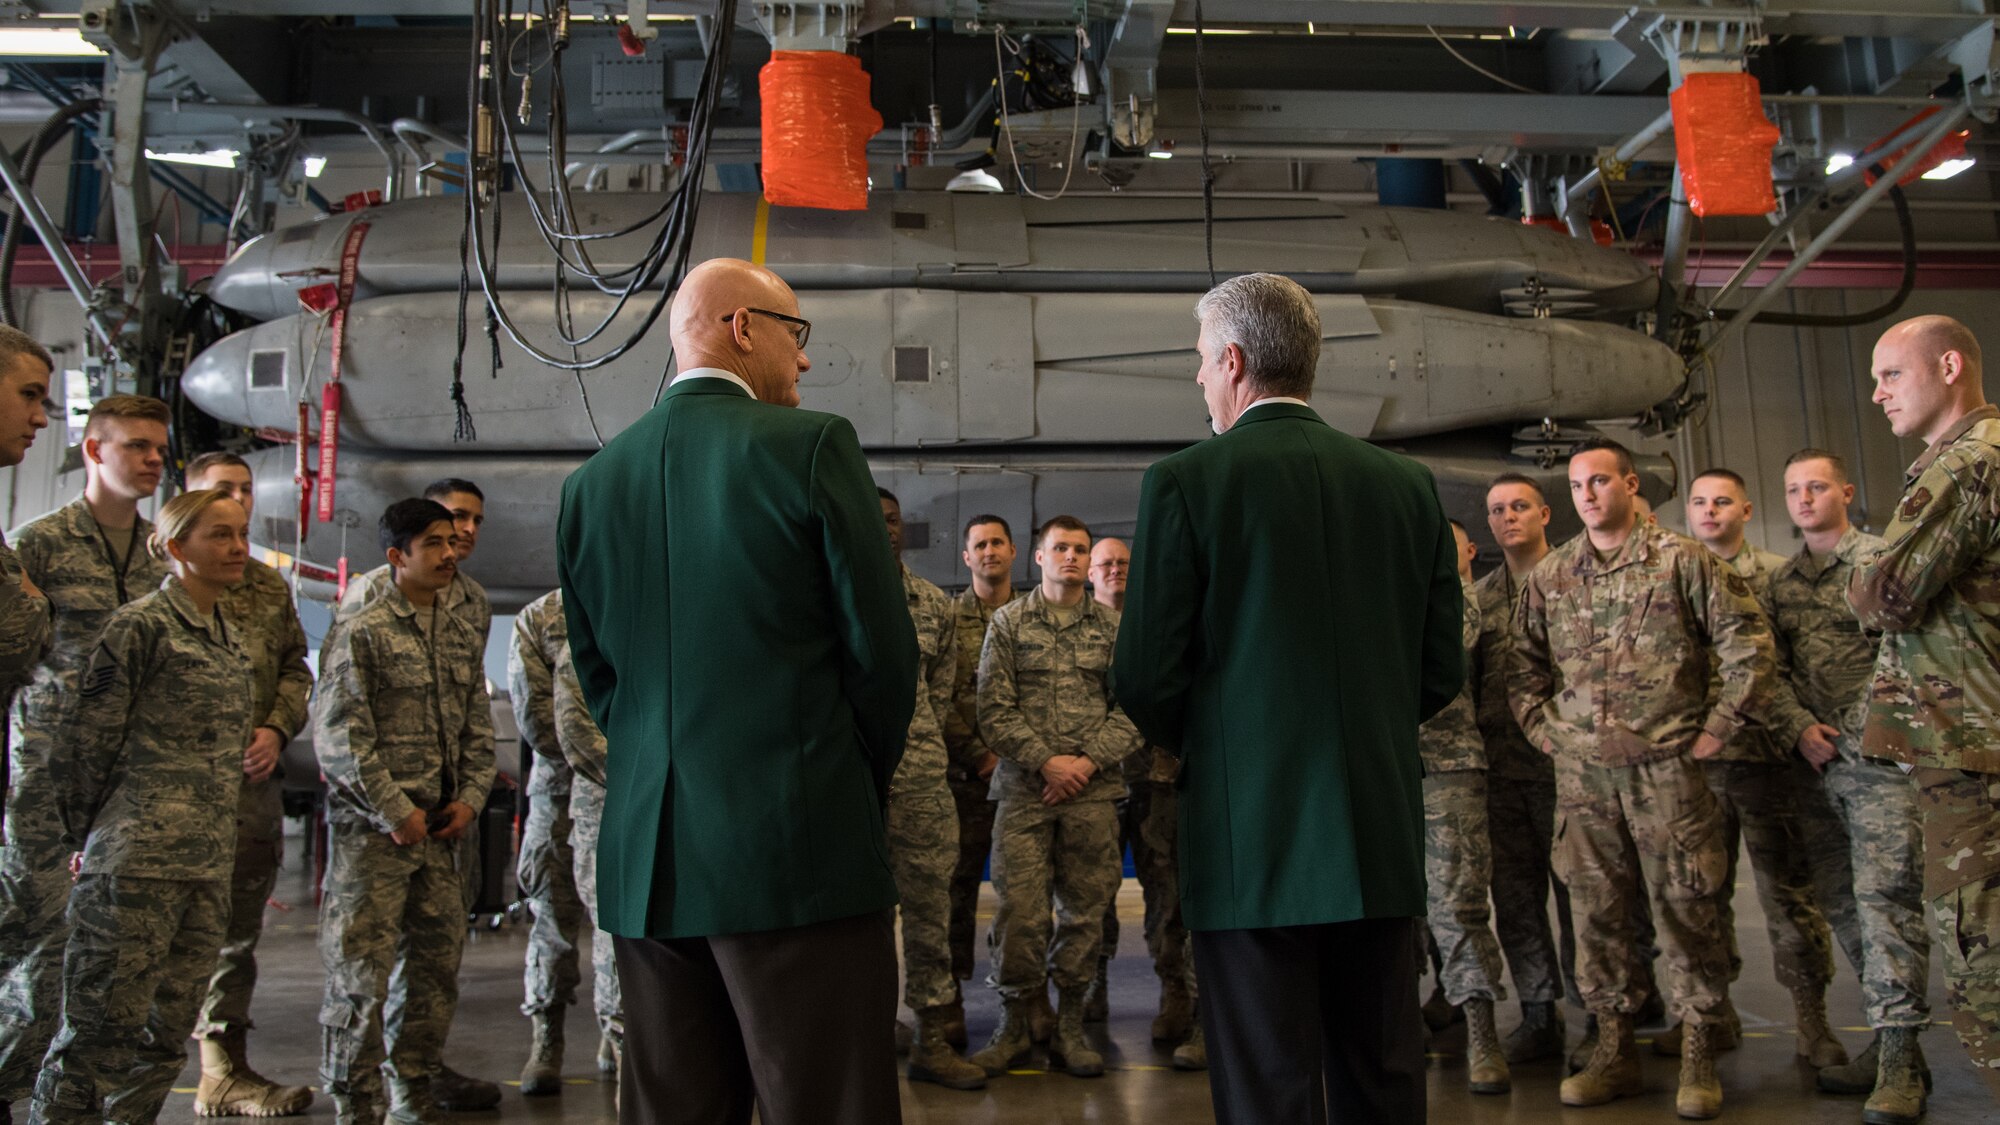 Retired Cols. Warren Ward (left) and Trey Morriss (right), members of Operation Secret Squirrel, speak to Airmen during the final download of the Conventional Air-Launched Cruise Missile (CALCM) package at Barksdale Air Force Base, La., Nov. 20, 2019. Operation Secret Squirrel was the first time CALCM missiles were used in combat. (U.S. Air Force photo by Airman 1st Class Jacob B. Wrightsman)